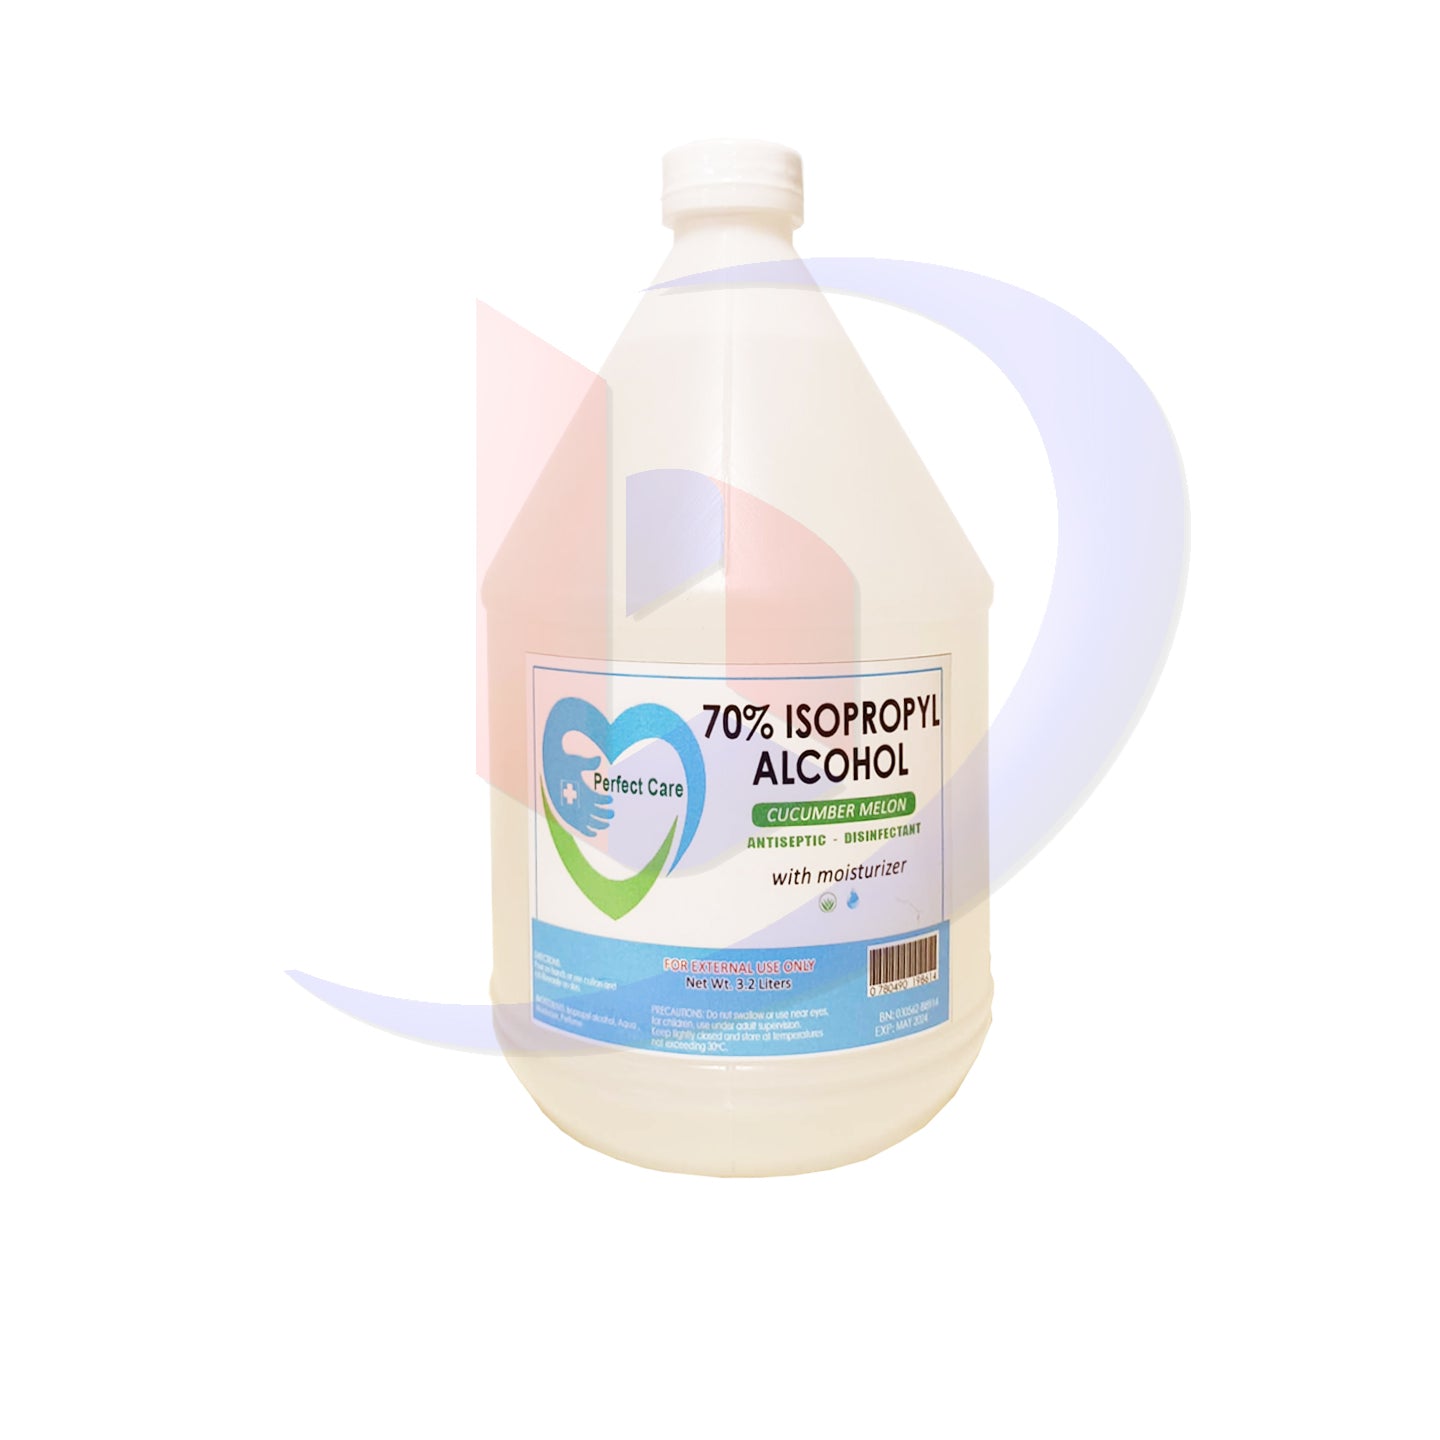 Isopropyl Alcohol (Protect Care) Cucumber Melon with Moisturizer 3.2 Gallon 1's